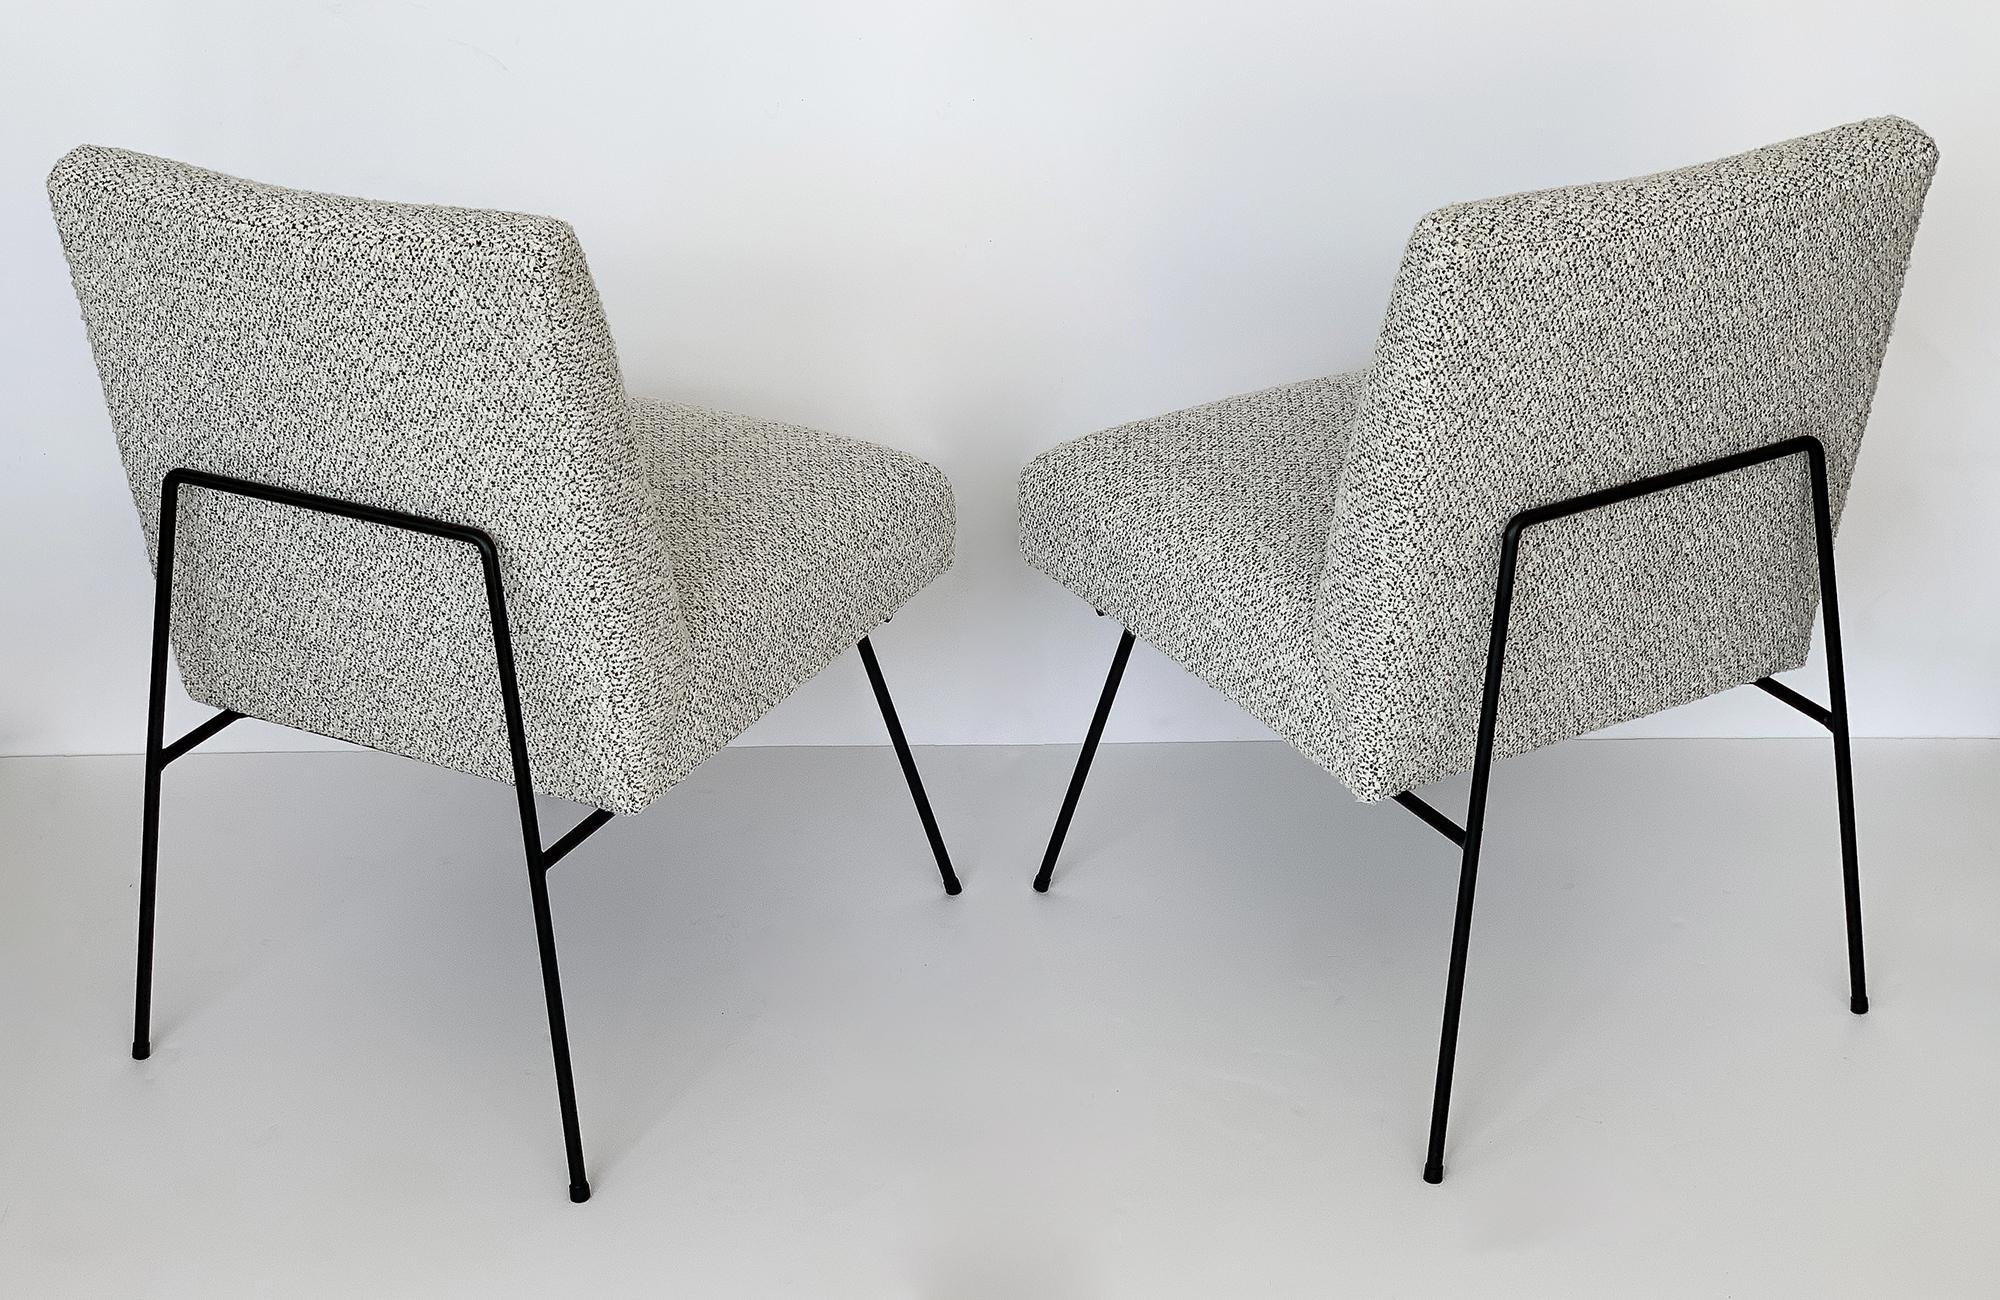 Pair of Allan Gould style iron frame armless slipper lounge chairs, circa 1950s. Unique design along the back where the legs create a U-shape that sits slightly away and half way up the back. Newly upholstered in a Kelly Wearstler highly textural